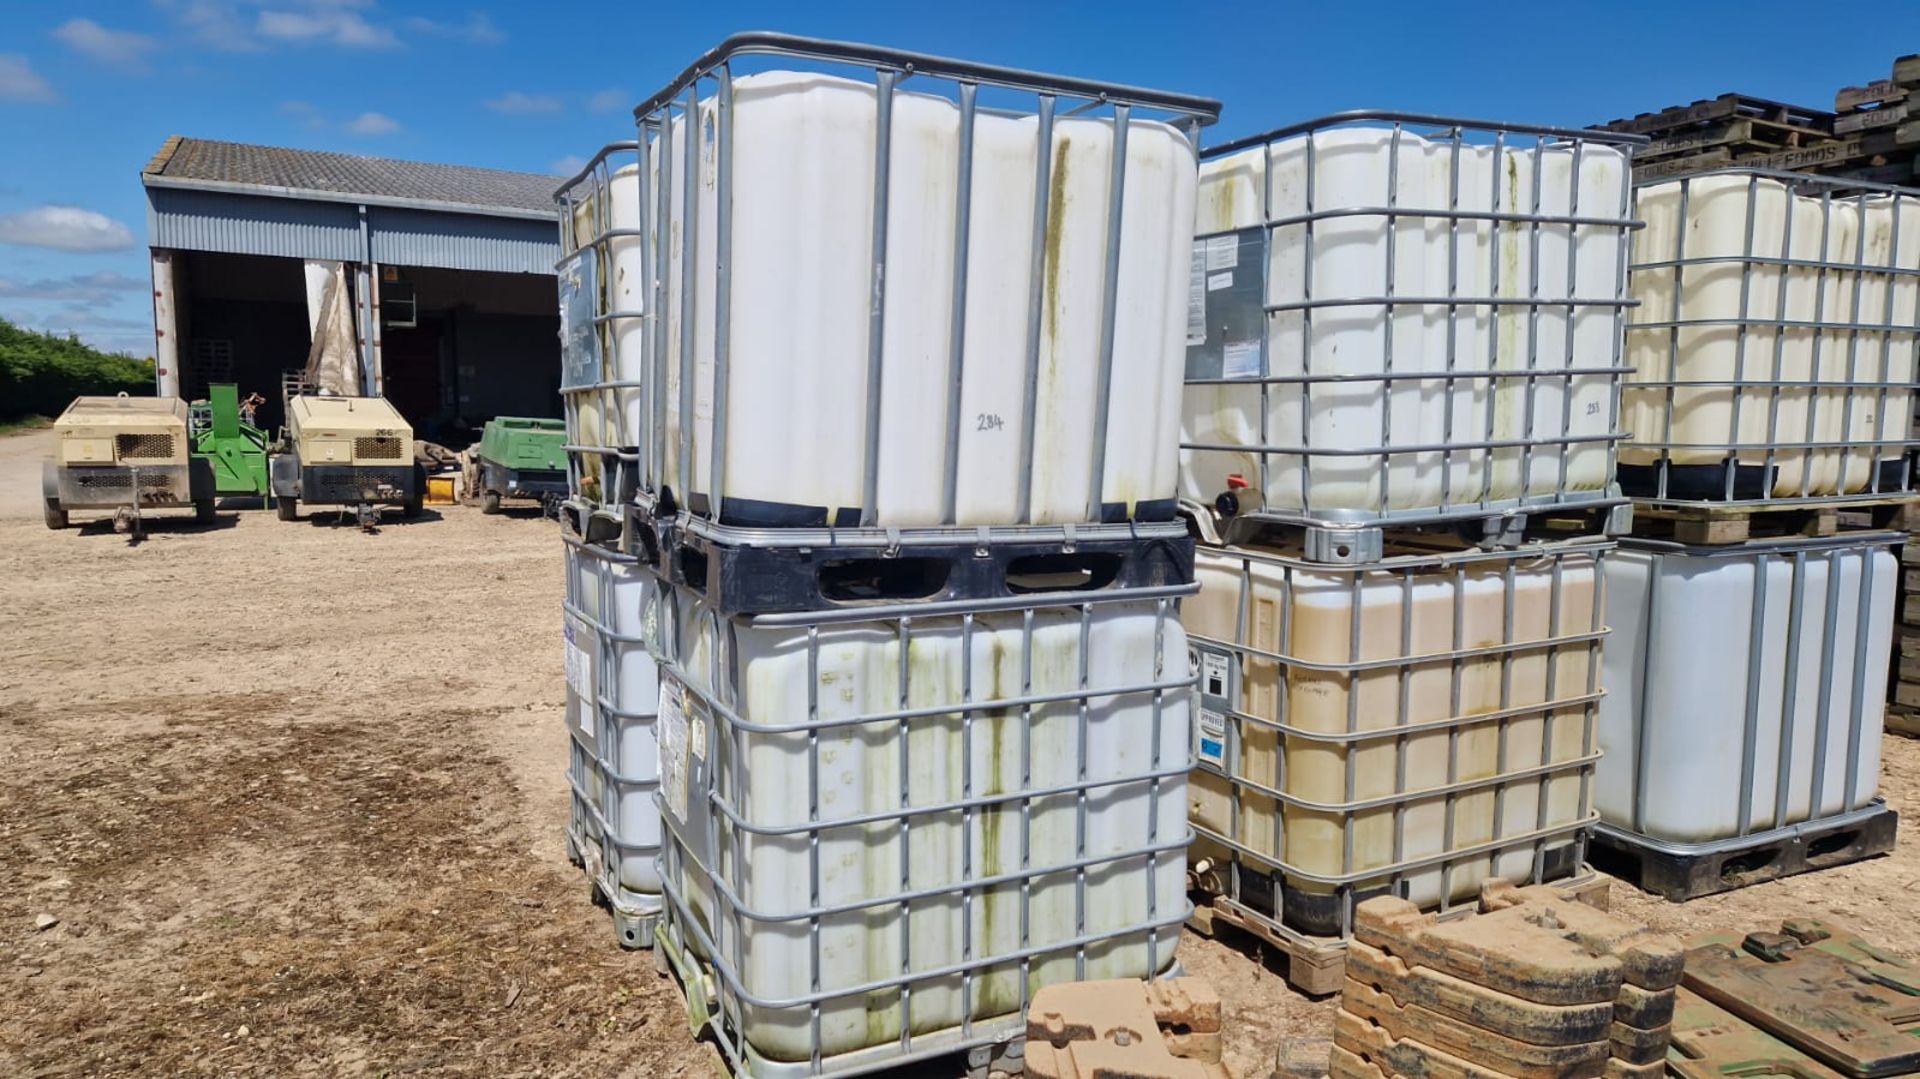 4 x IBC containers